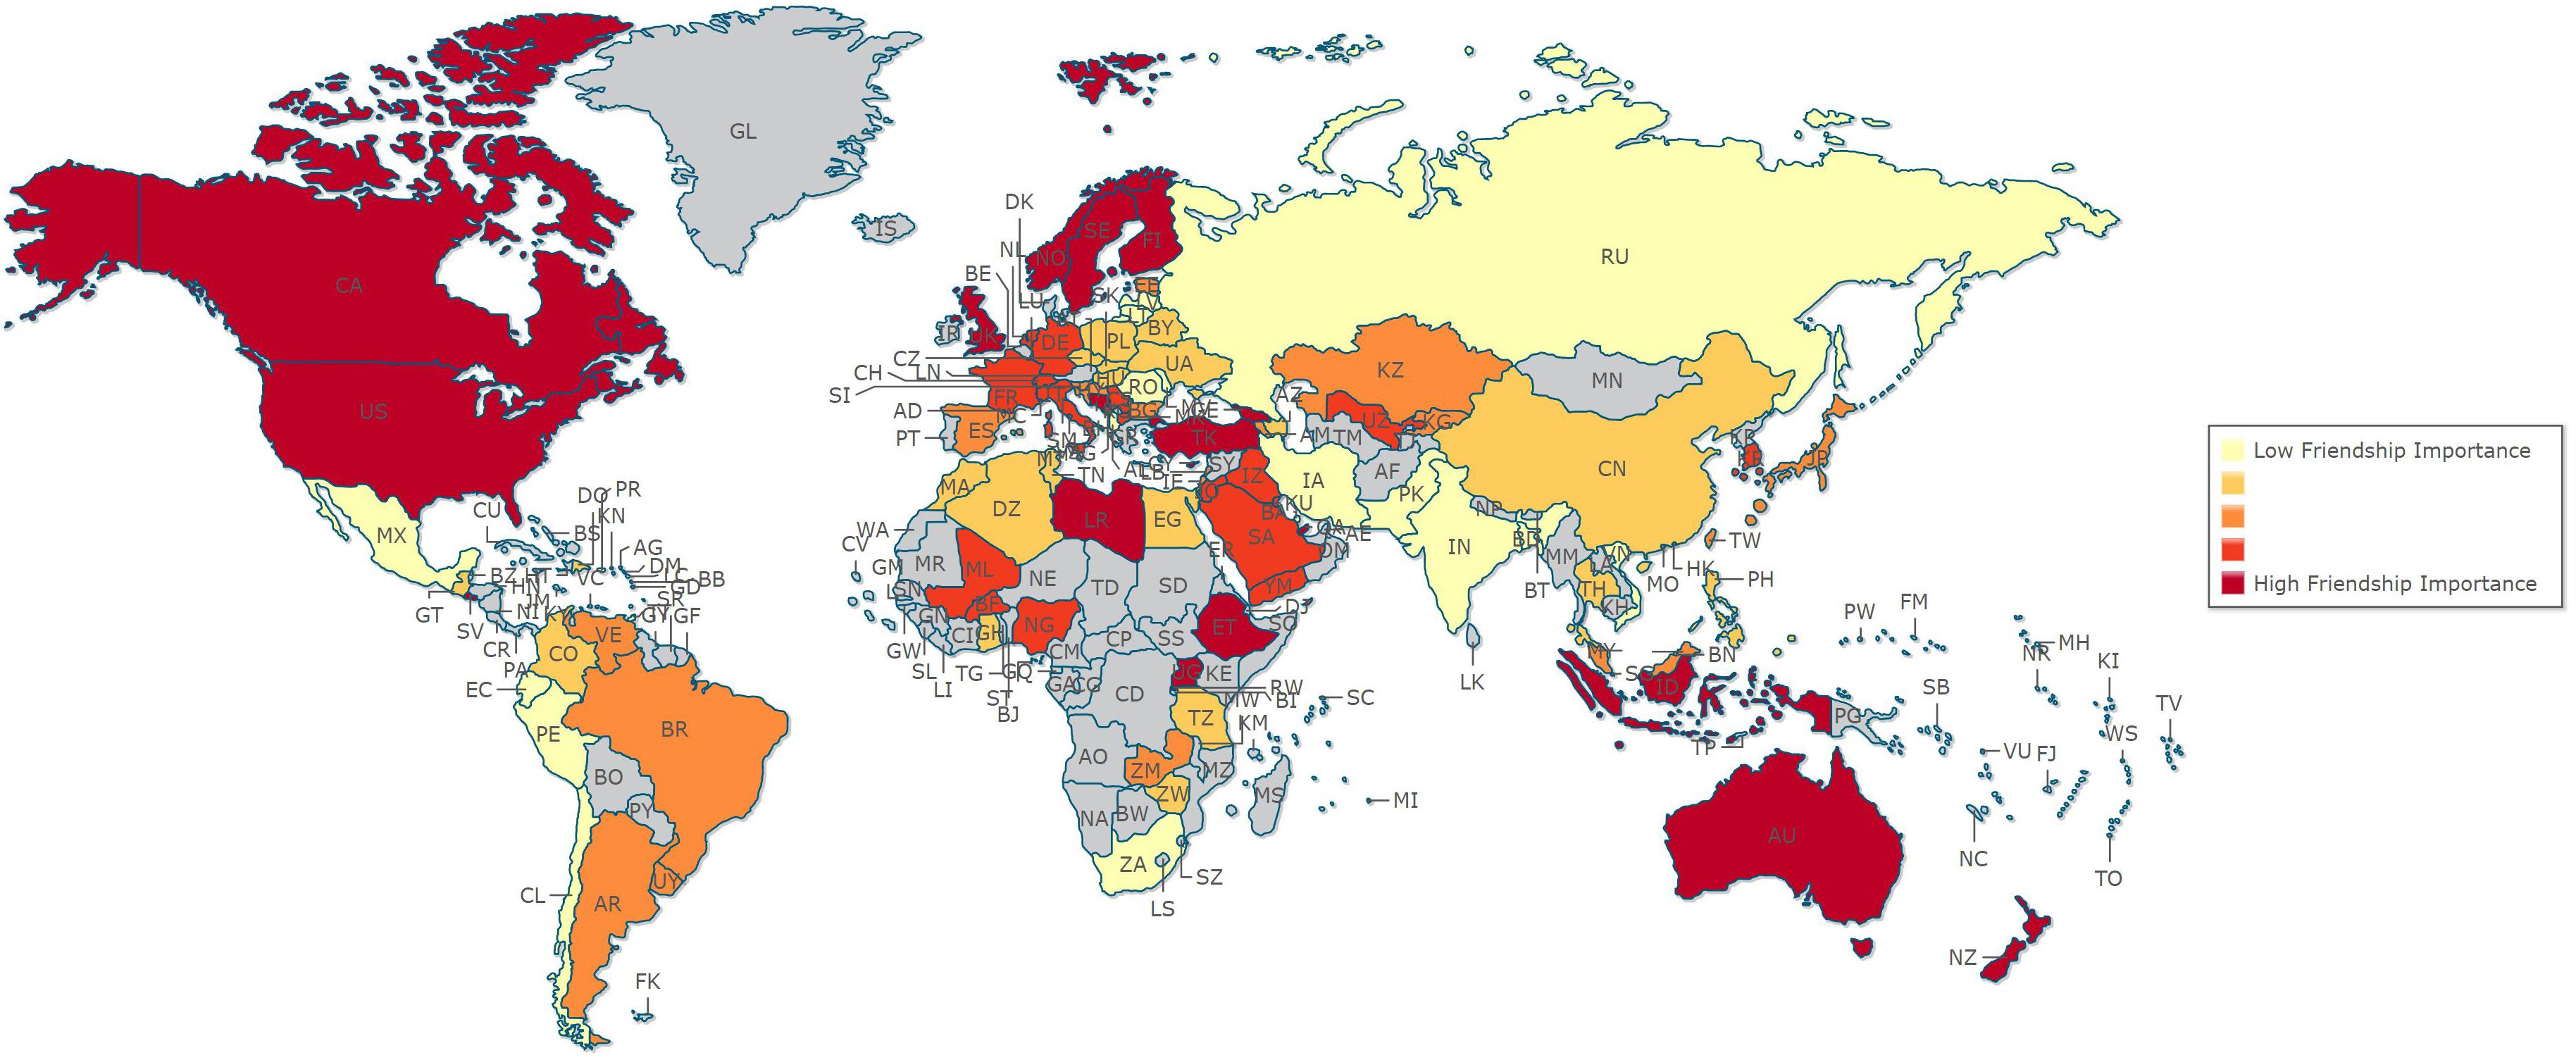 Ratings of friendship importance from 99 countries.